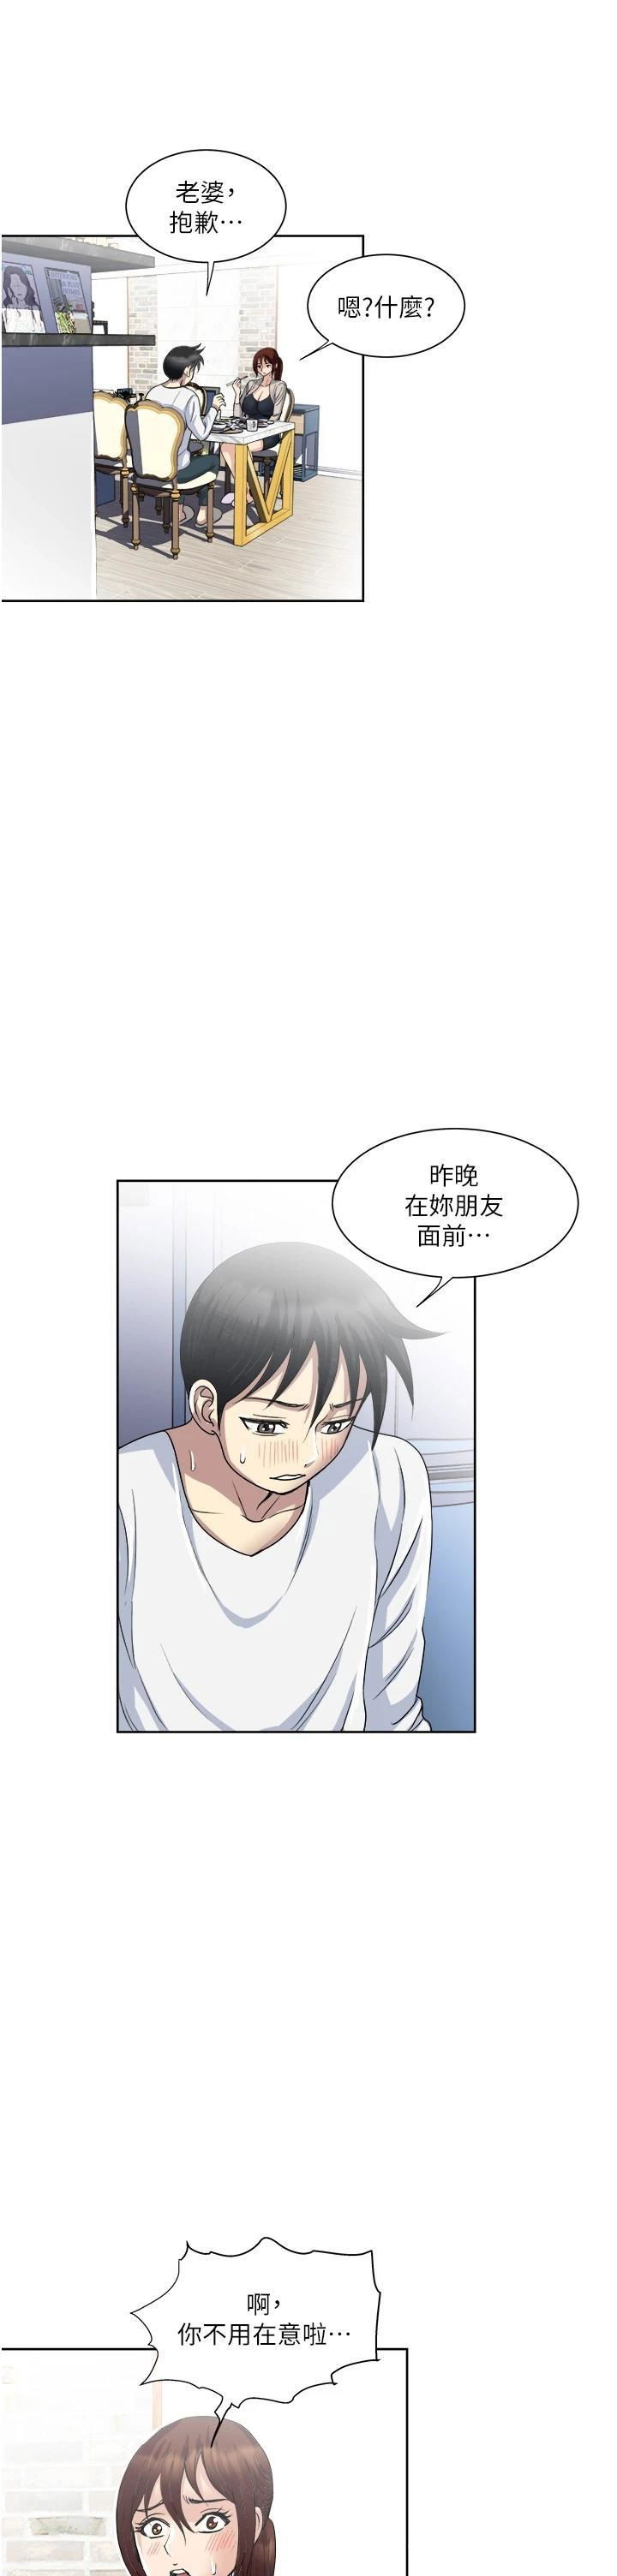 just-once-raw-chap-29-18